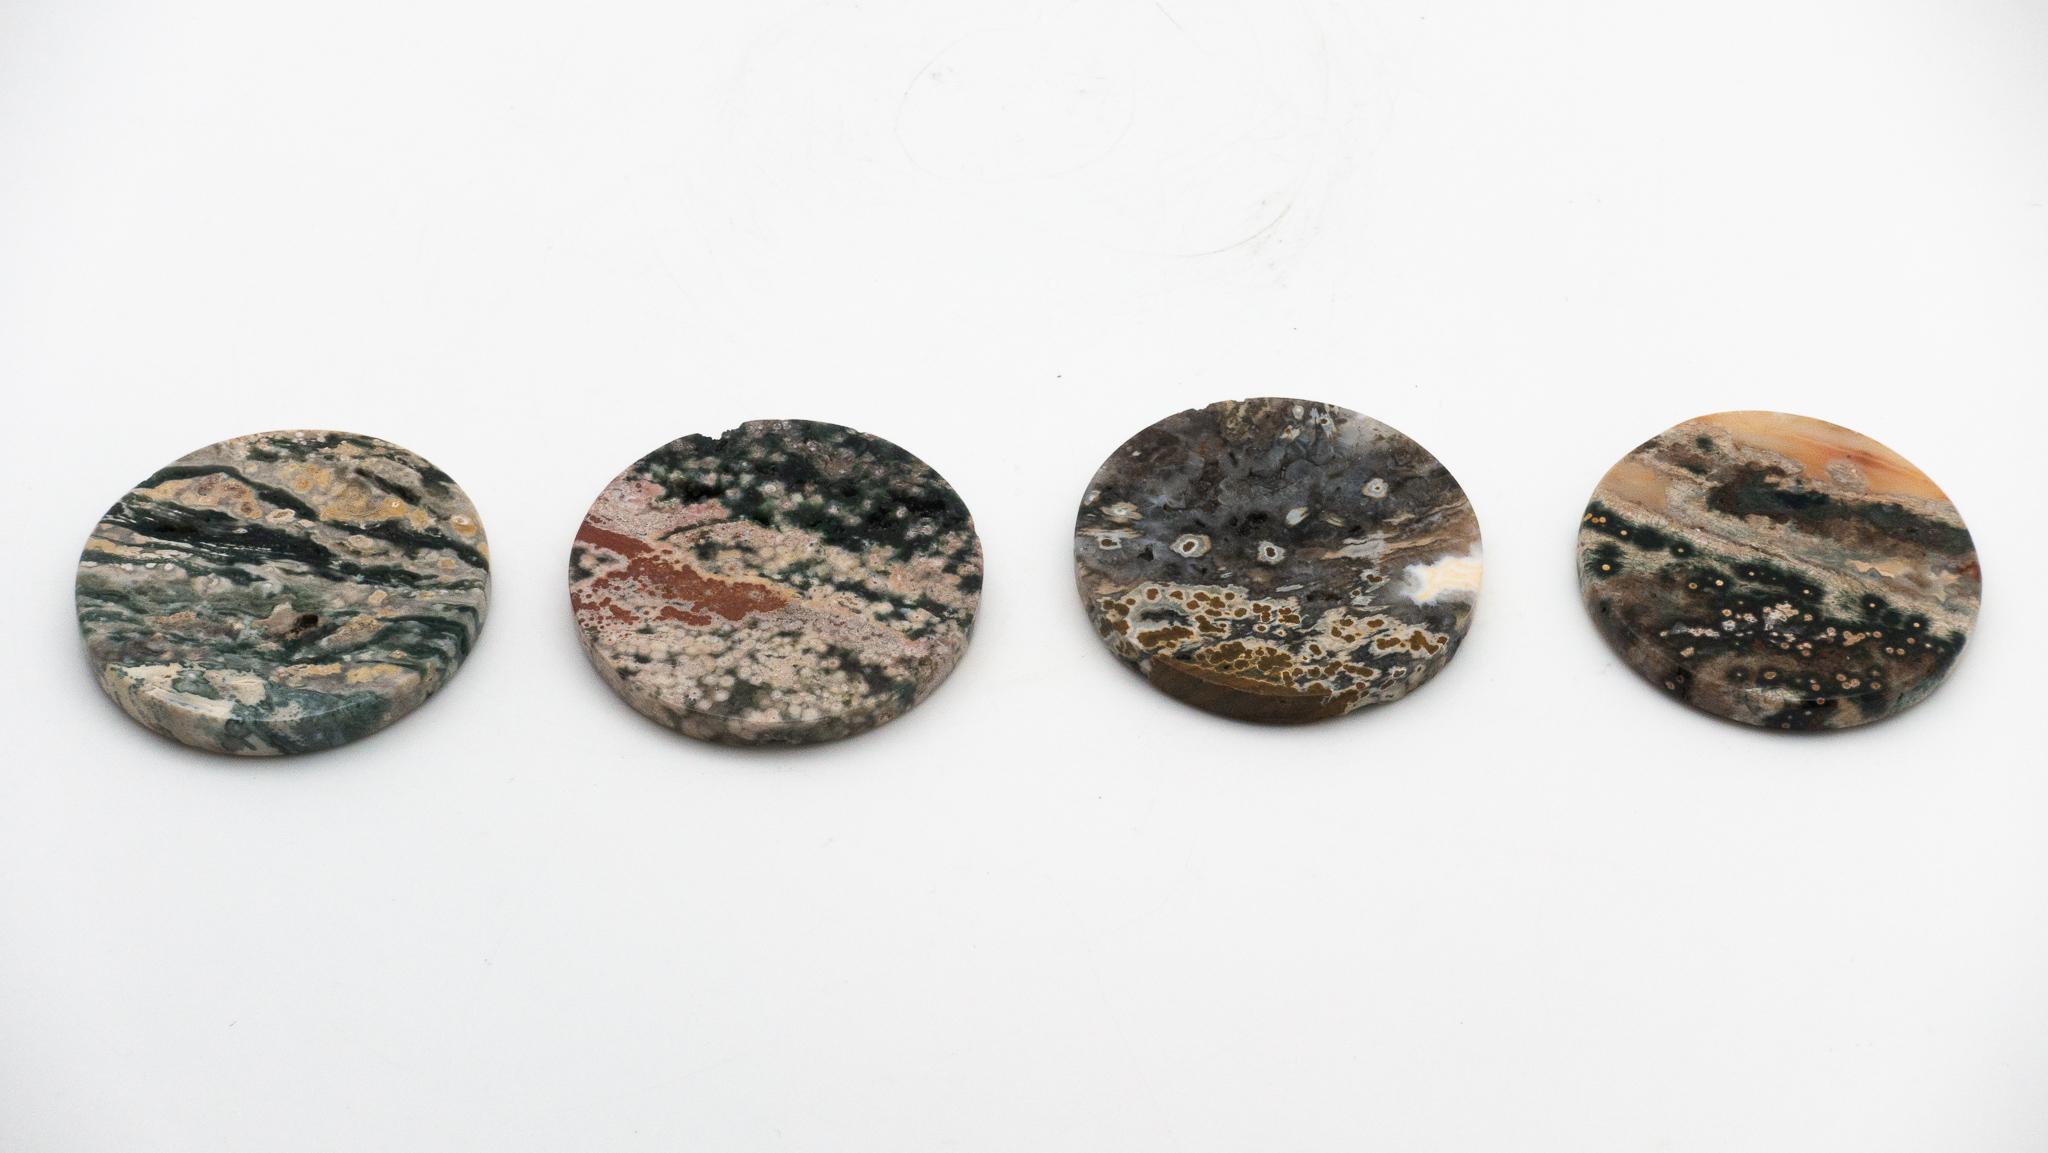 Set of four ocean jasper beverage coasters. Ocean jasper, or snakeskin jasper, is a combination of chalcedony, microcrystalline quartz and other minerals, resulting in colorful bands and patterns.